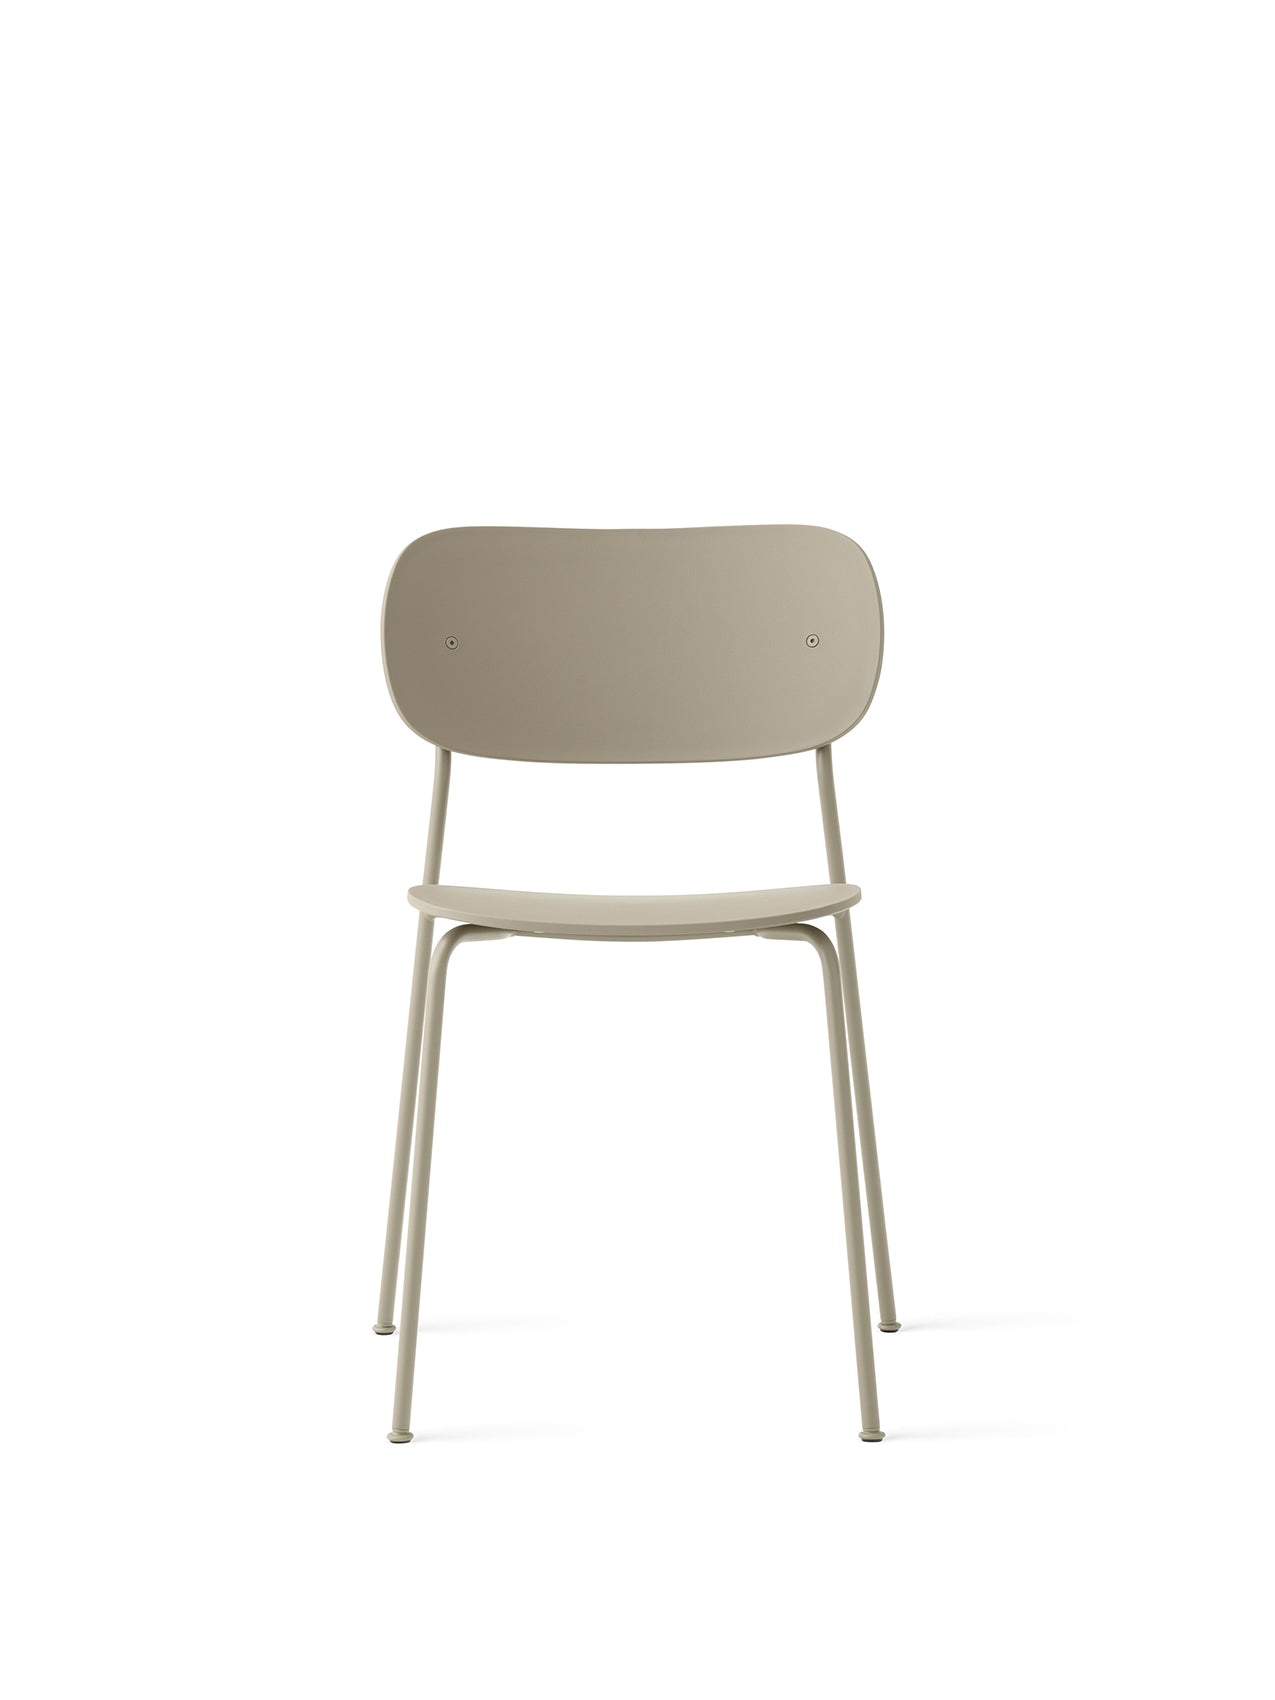 Co Dining Chair, Outdoor  Sleek and simple dining chair